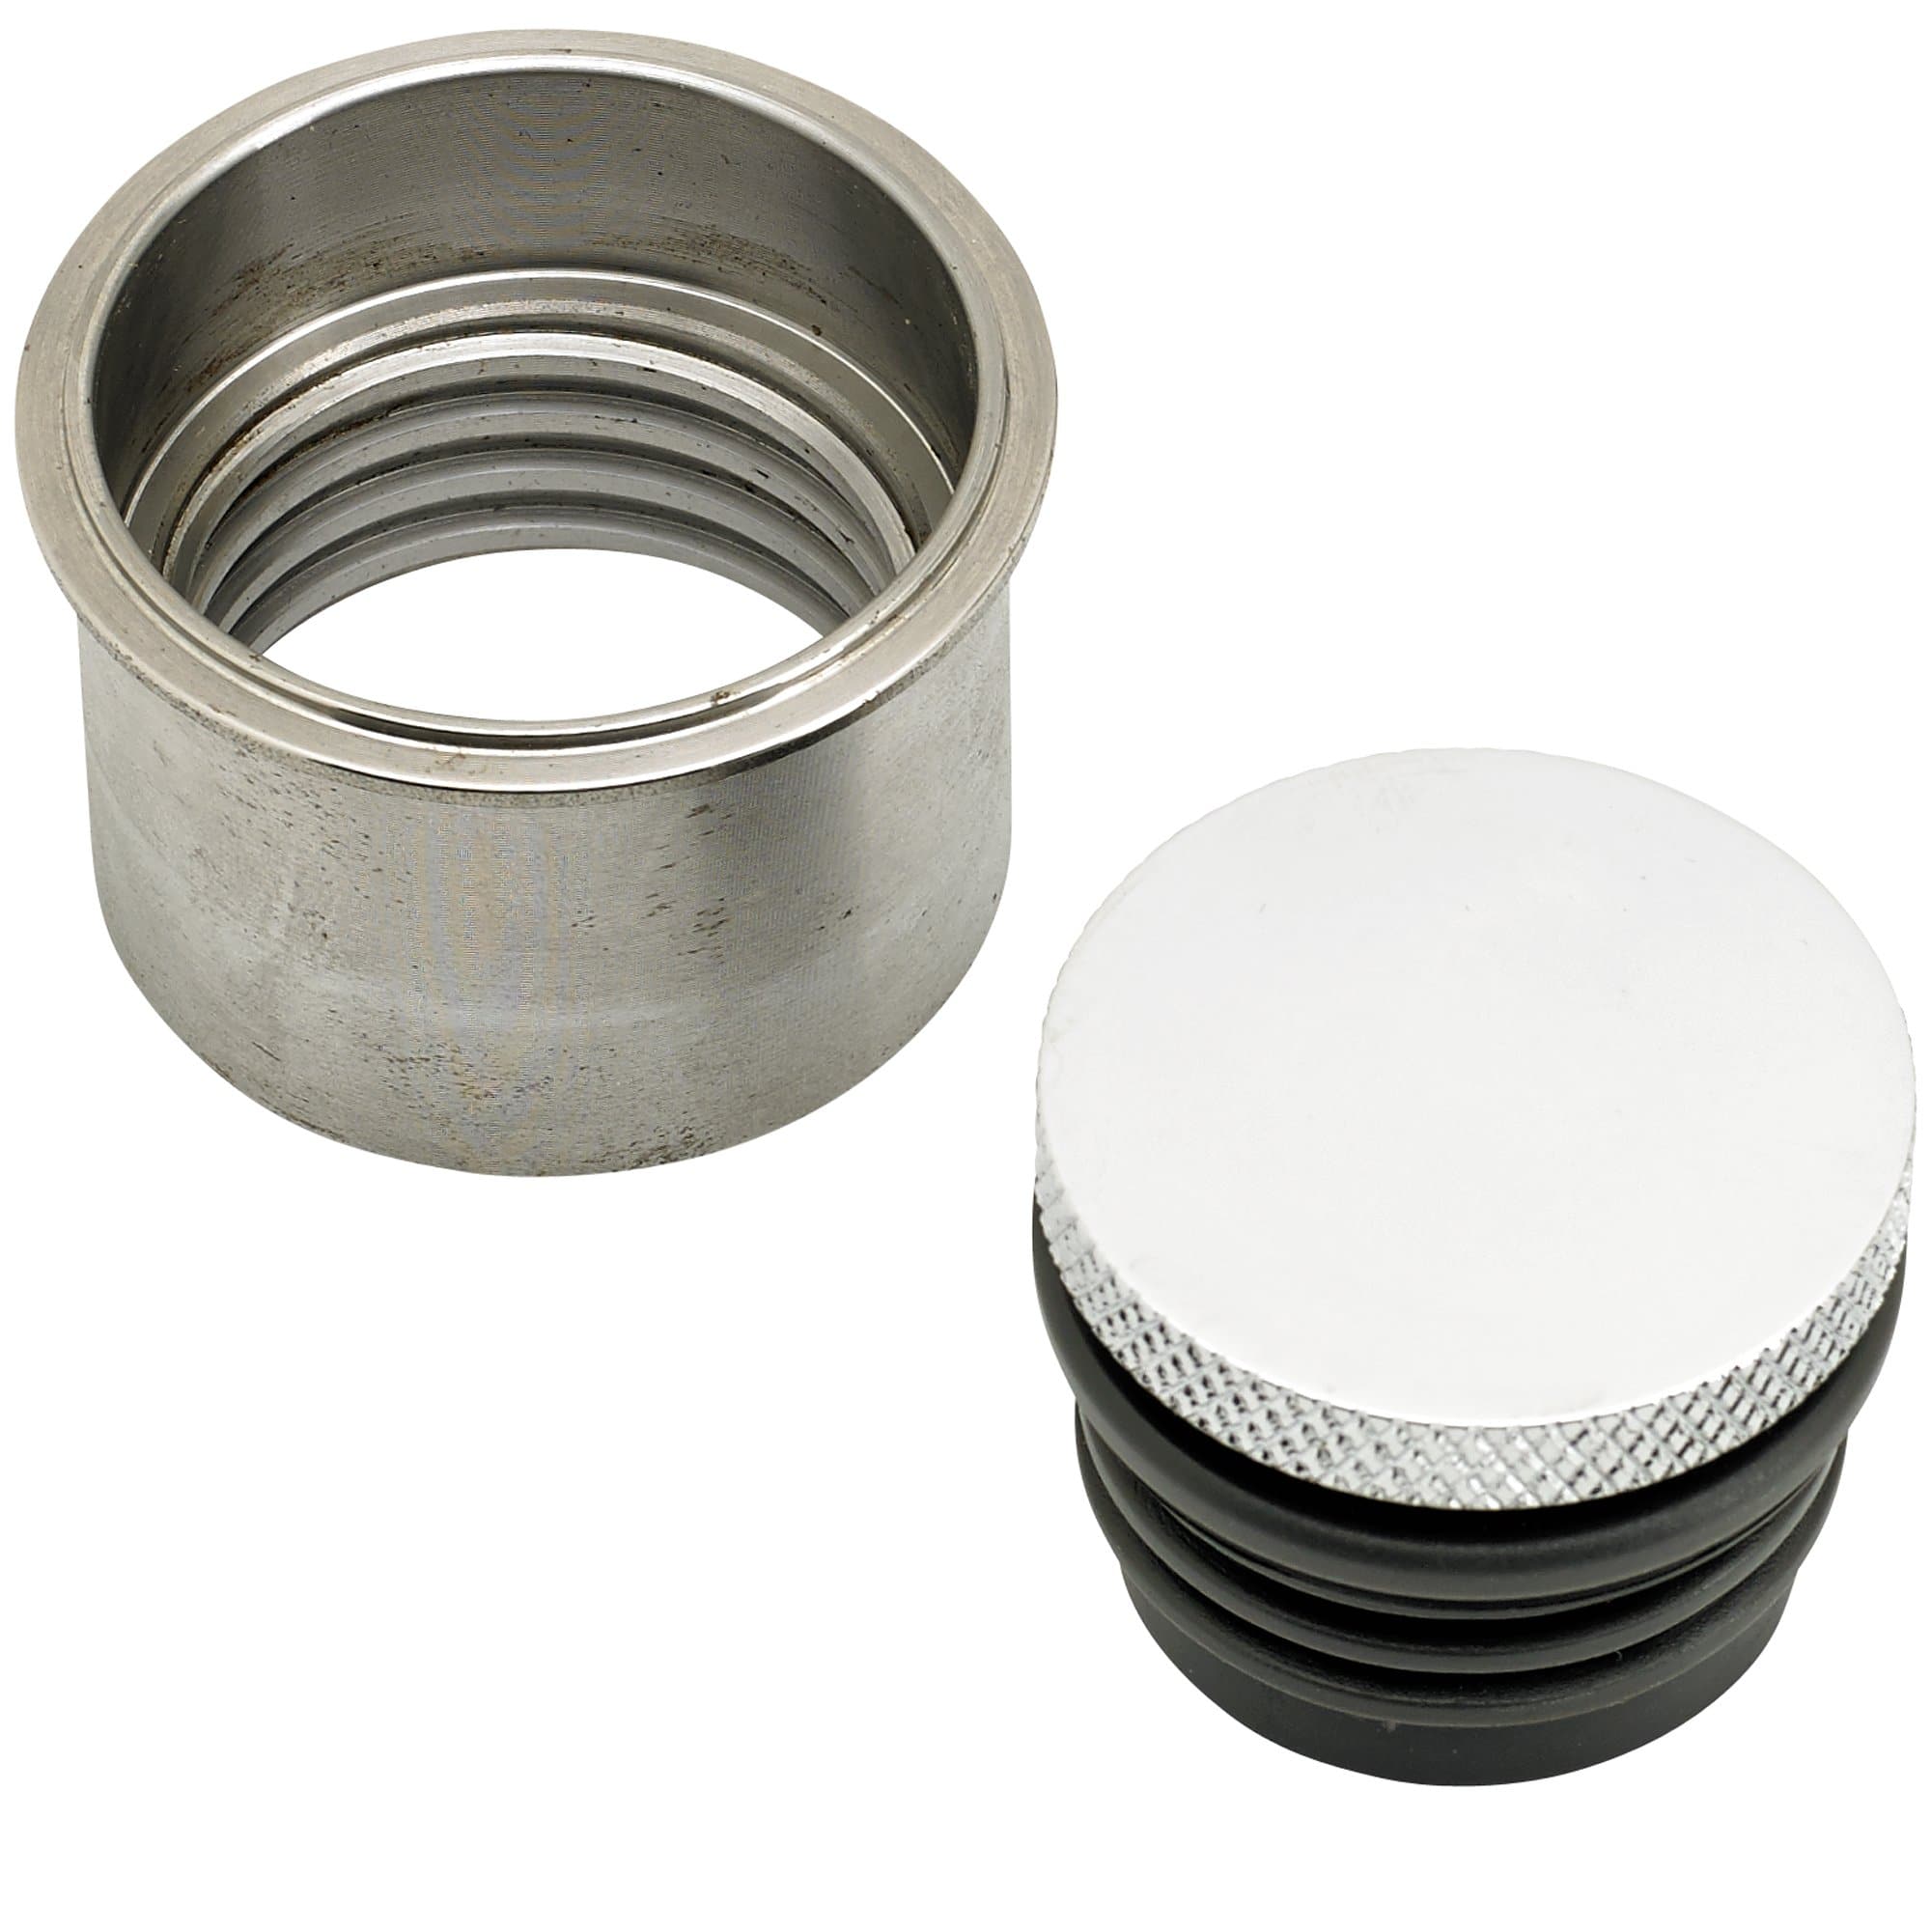 Cycle Standard - Custom Small Flush Mount Pop-Up Gas Cap and Weld in Bung